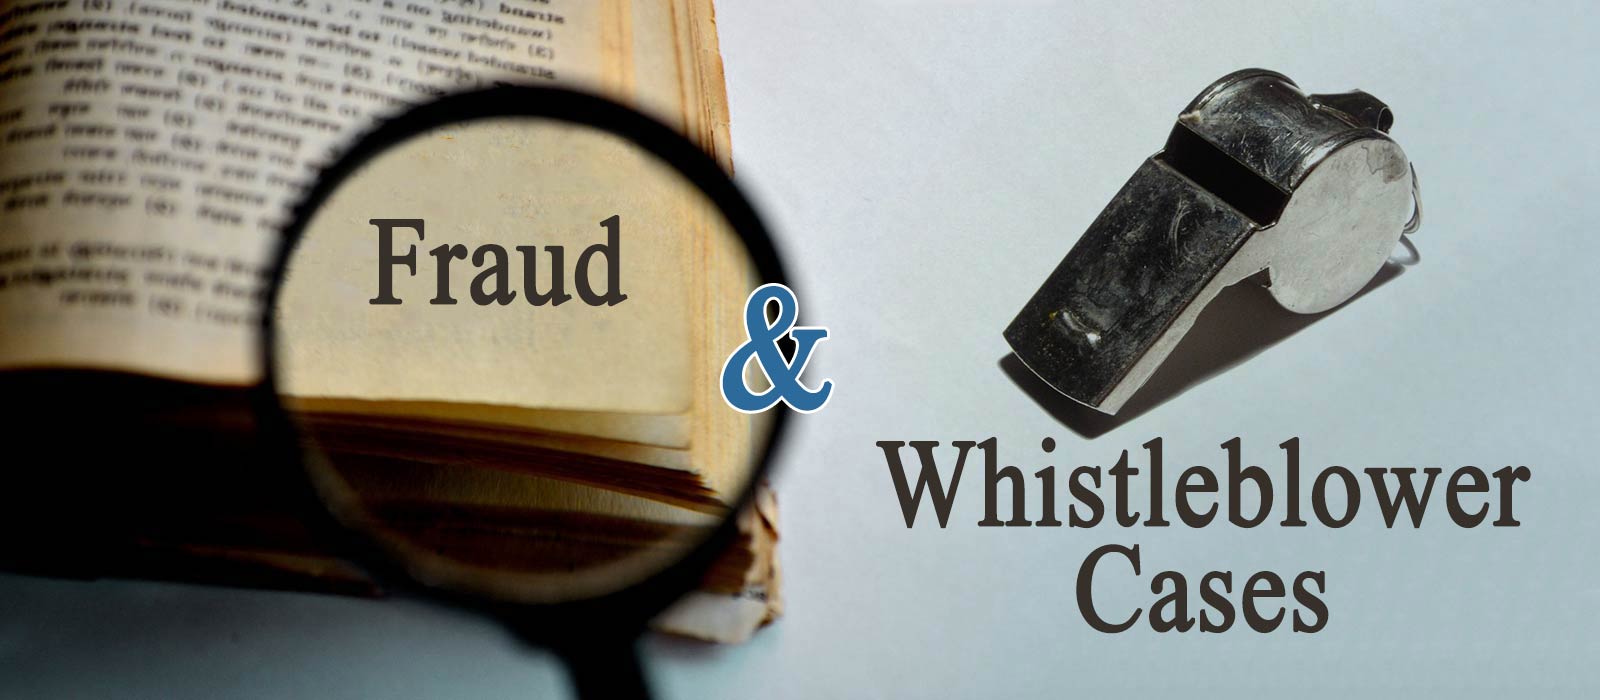 fraud5 Fraud and Whistleblower Cases